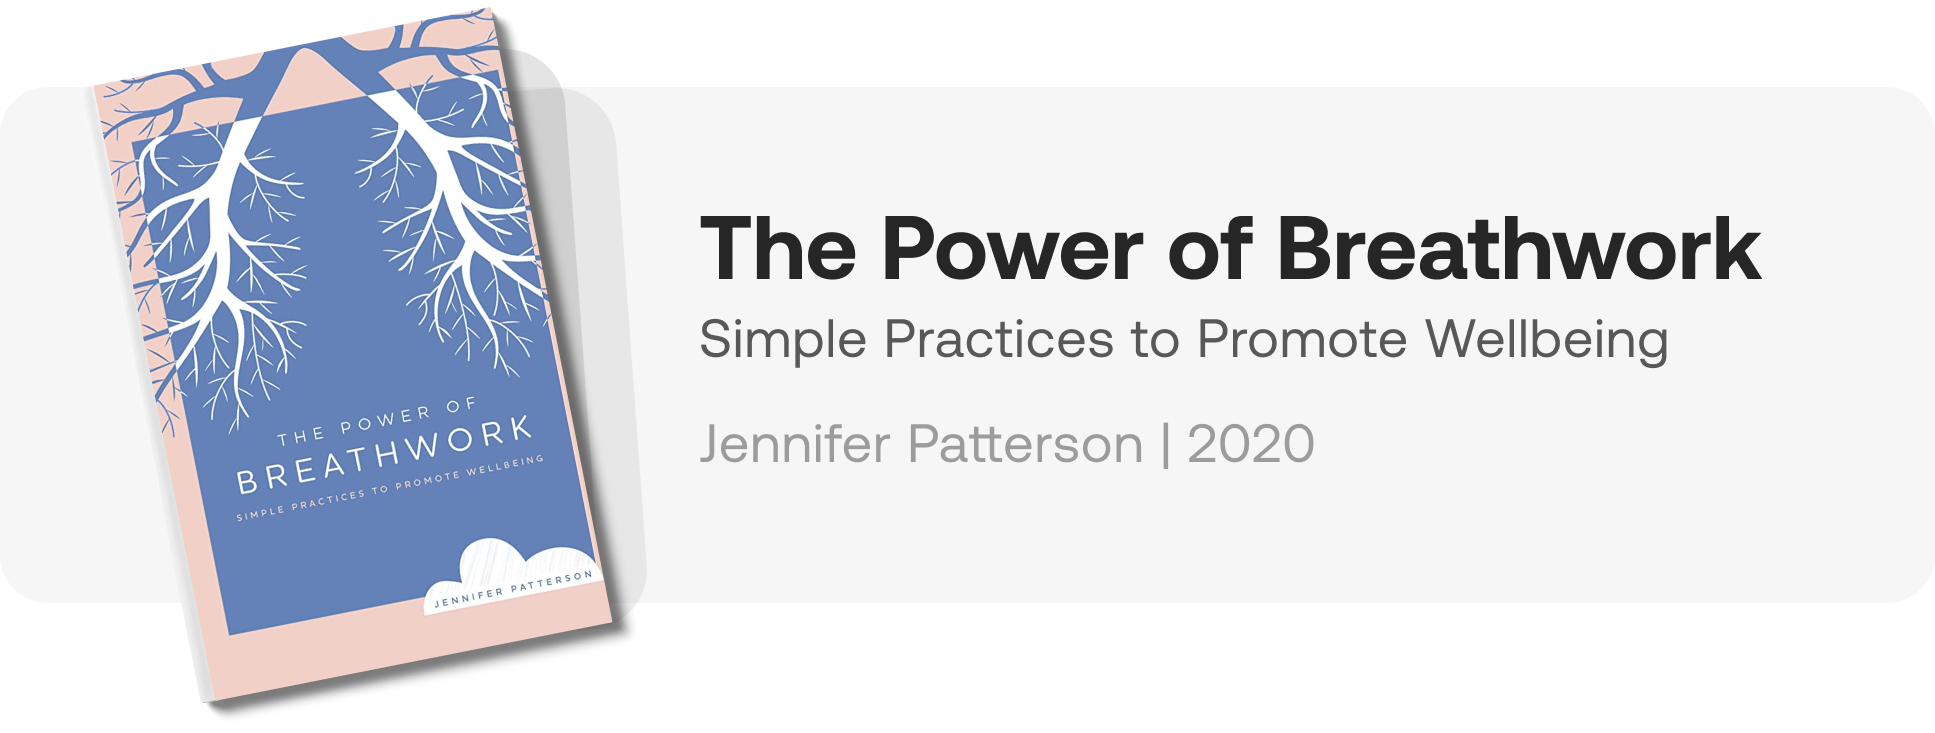 The Power of Breathwork Book Cover Jennifer Patterson (1)